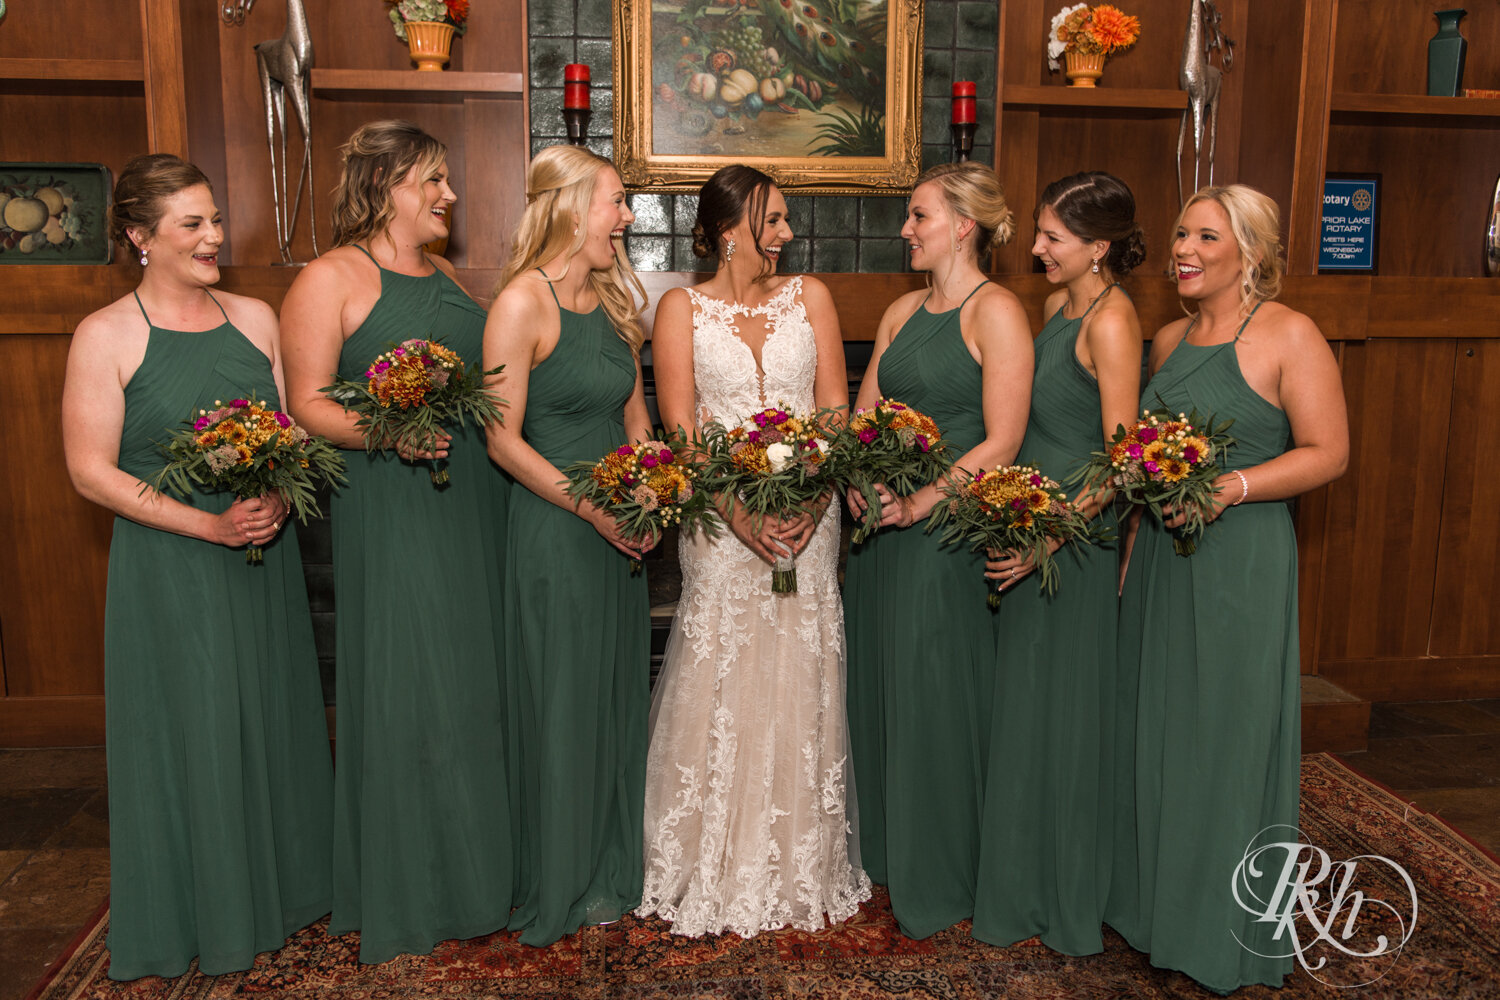 Wedding party in green dresses and gray suits smile on rainy day at The Wilds Golf Club in Prior Lake, Minnesota.